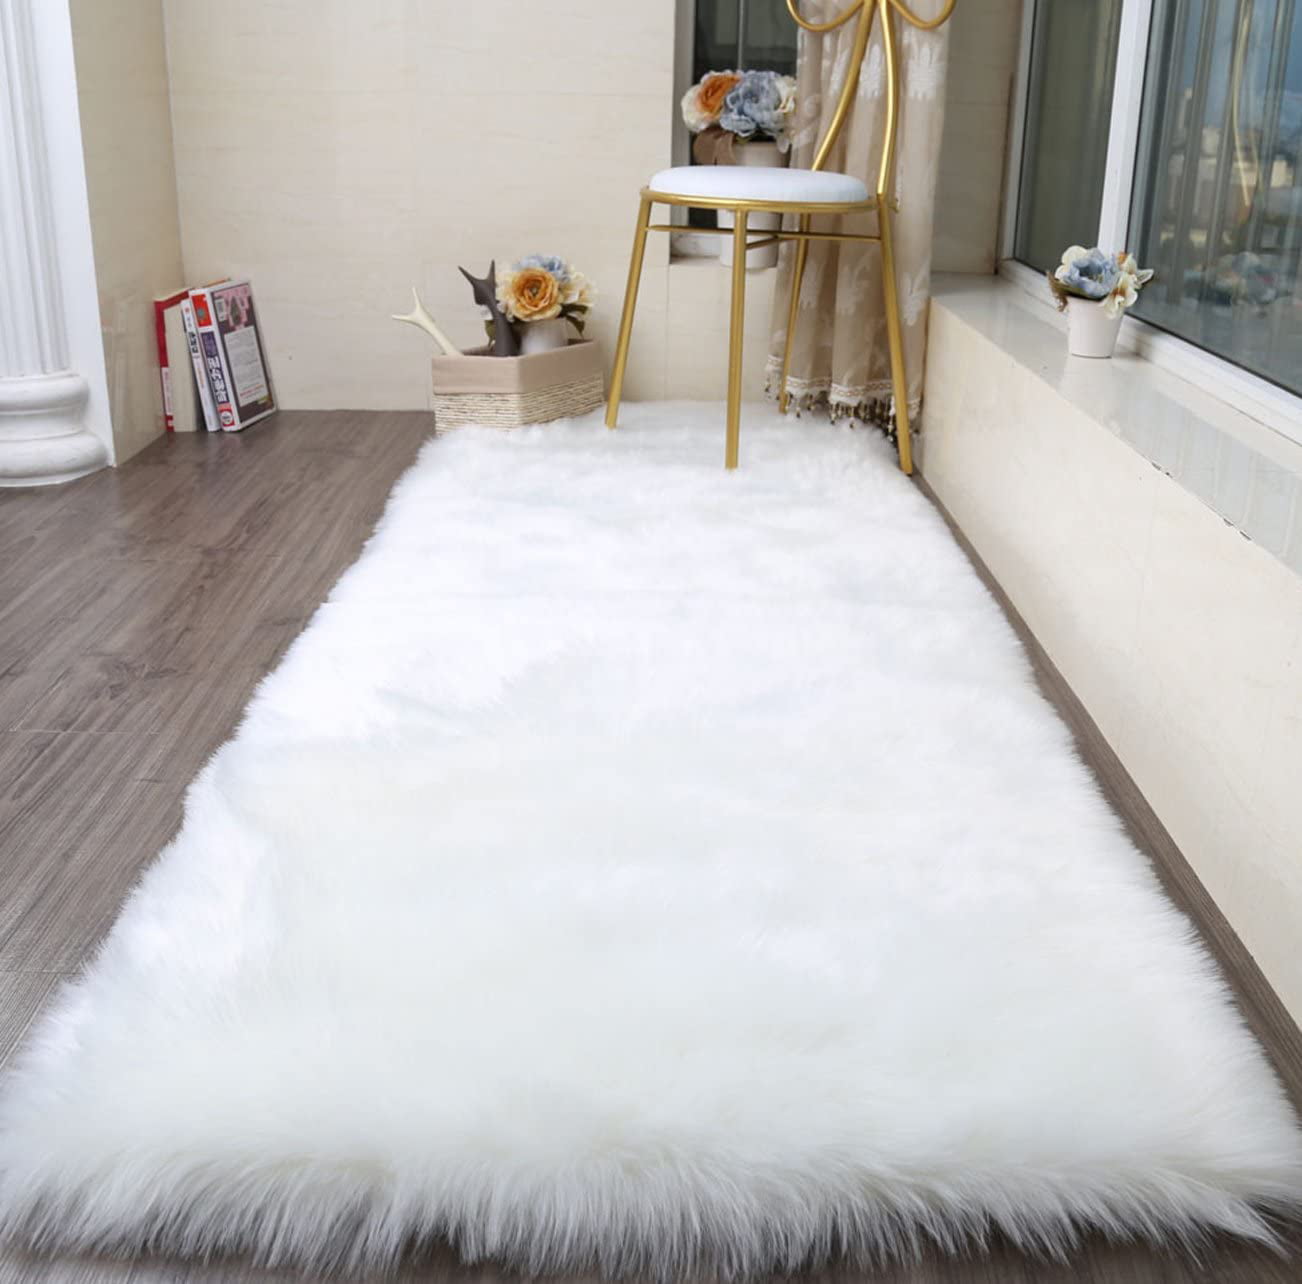 71x31.5 inches Soft Faux Sheepskin Fur Area Rugs Round